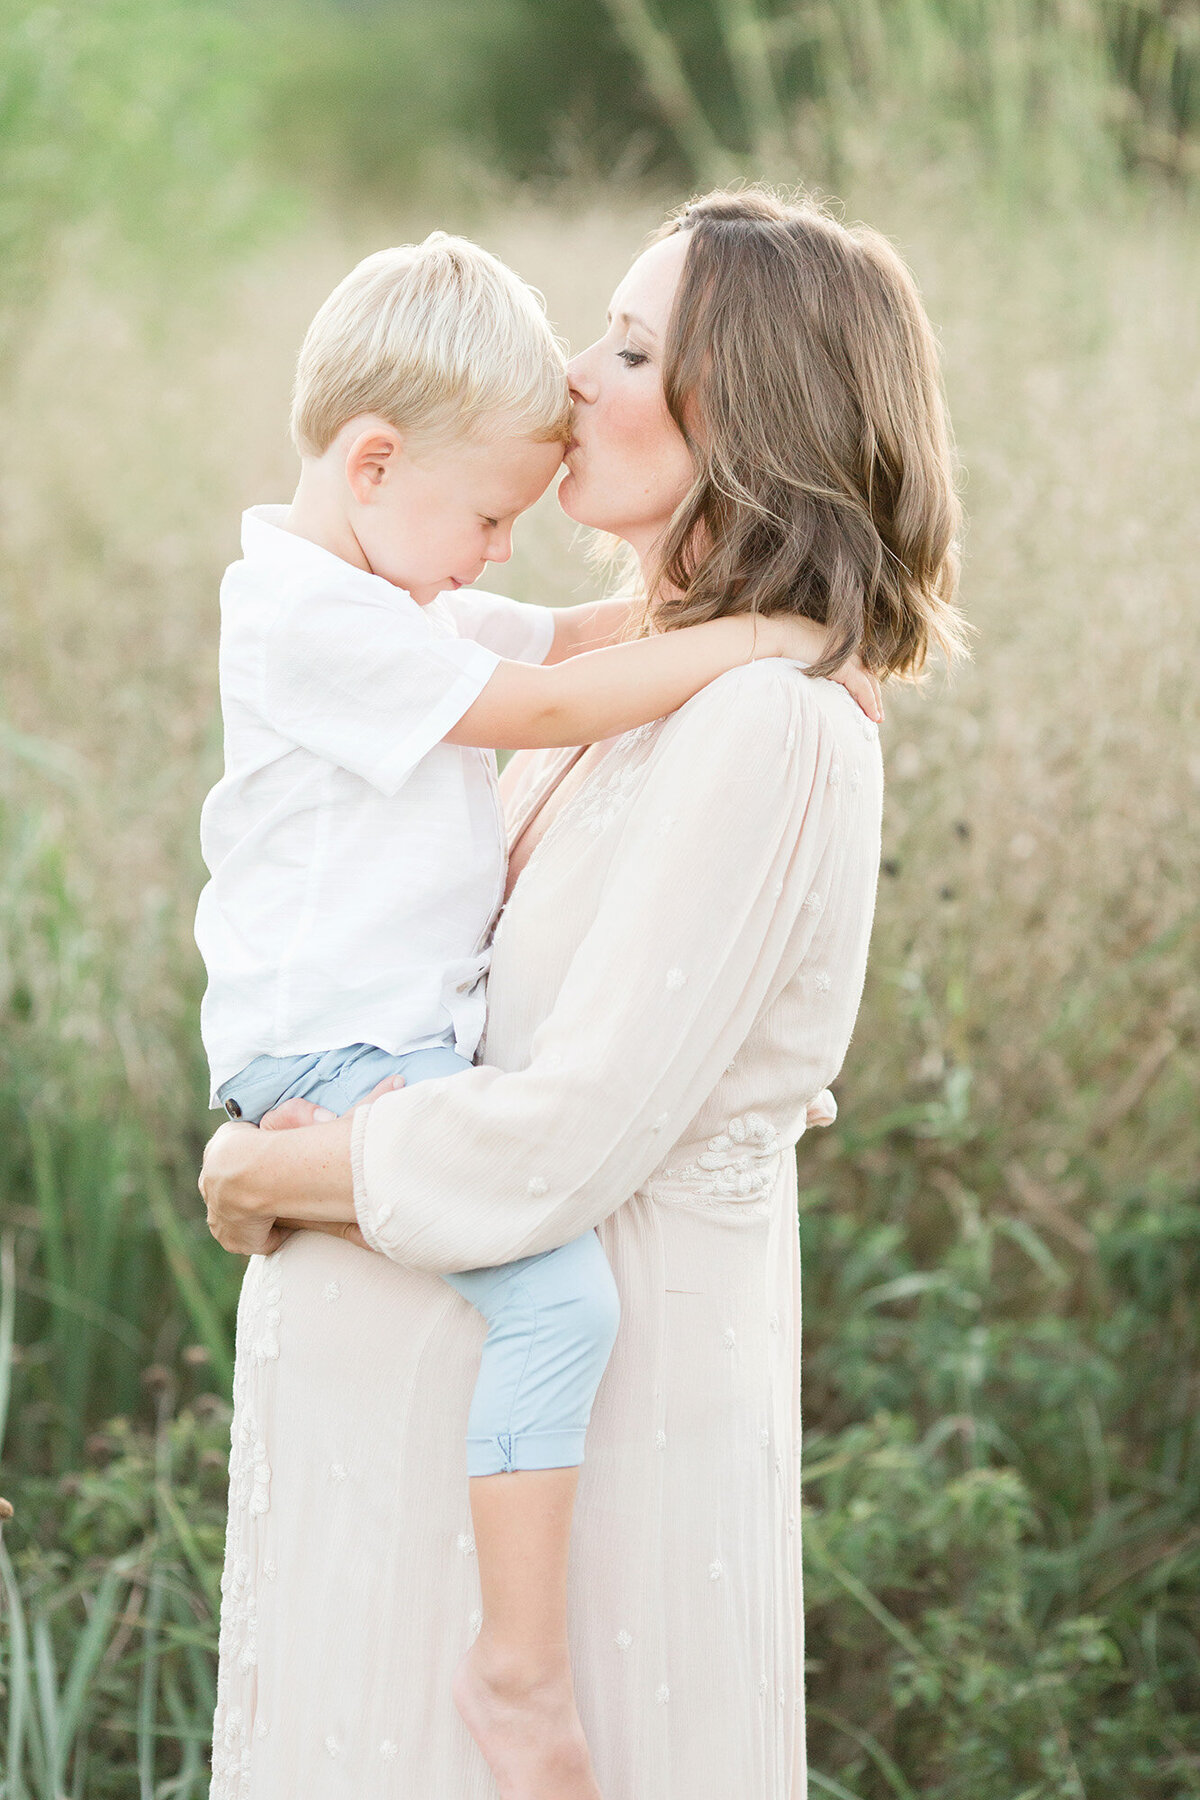 Louisville KY pregnant mother holds her older son during her outdoor maternity photo shoot with Julie Brock Photography